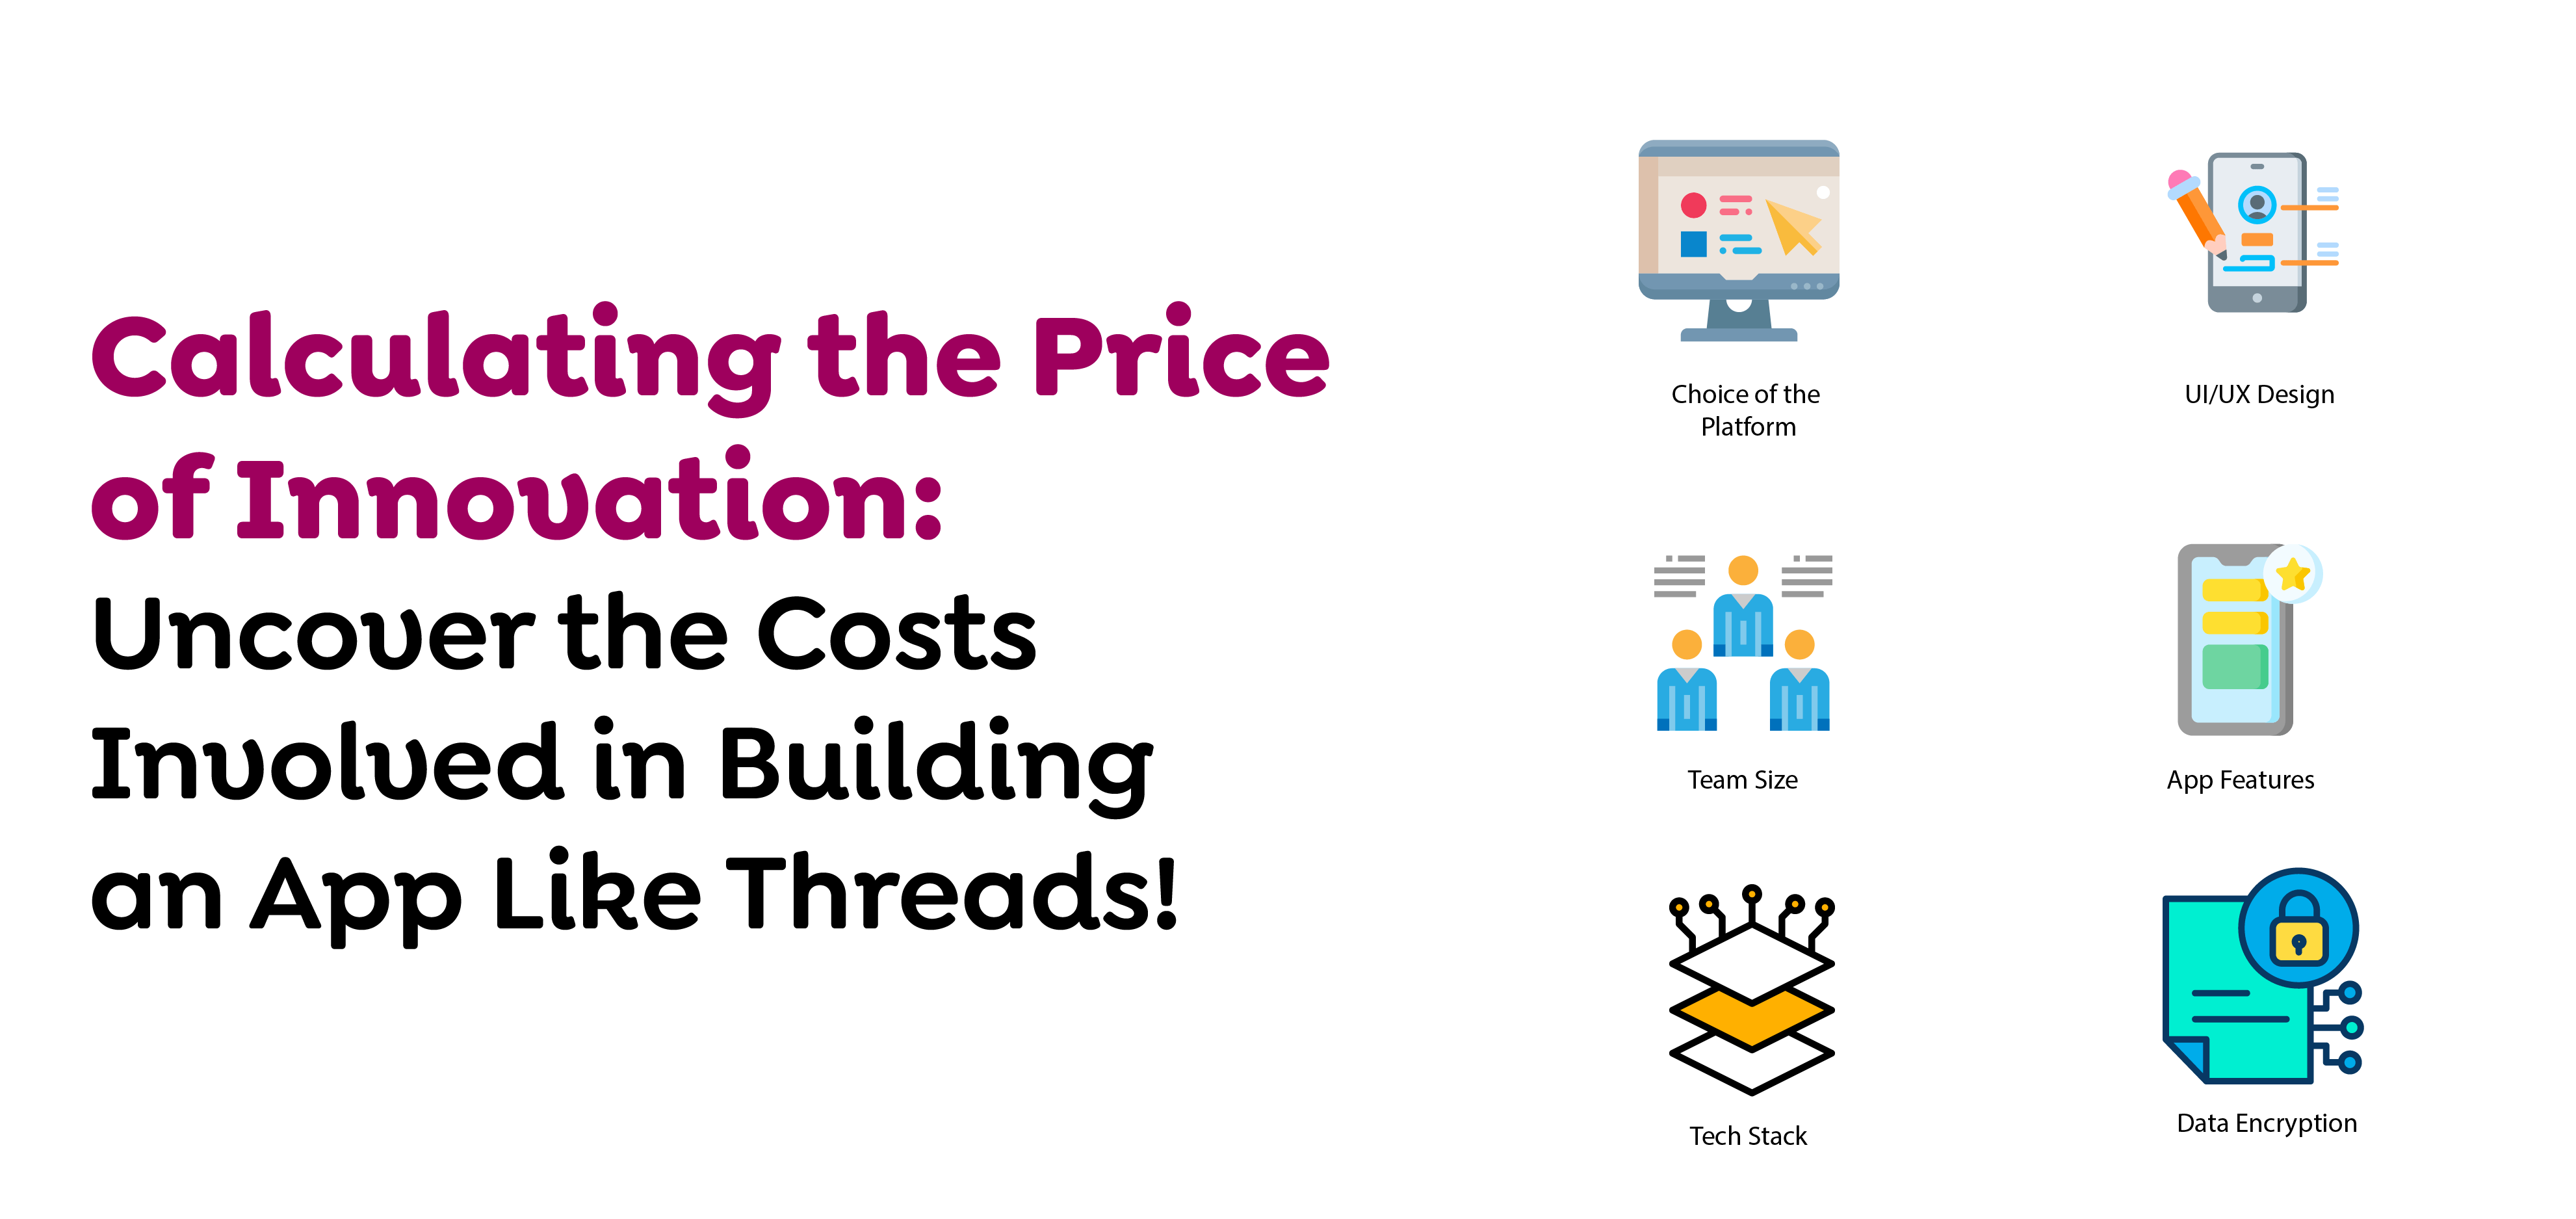 Cost to Build An App Like Threads